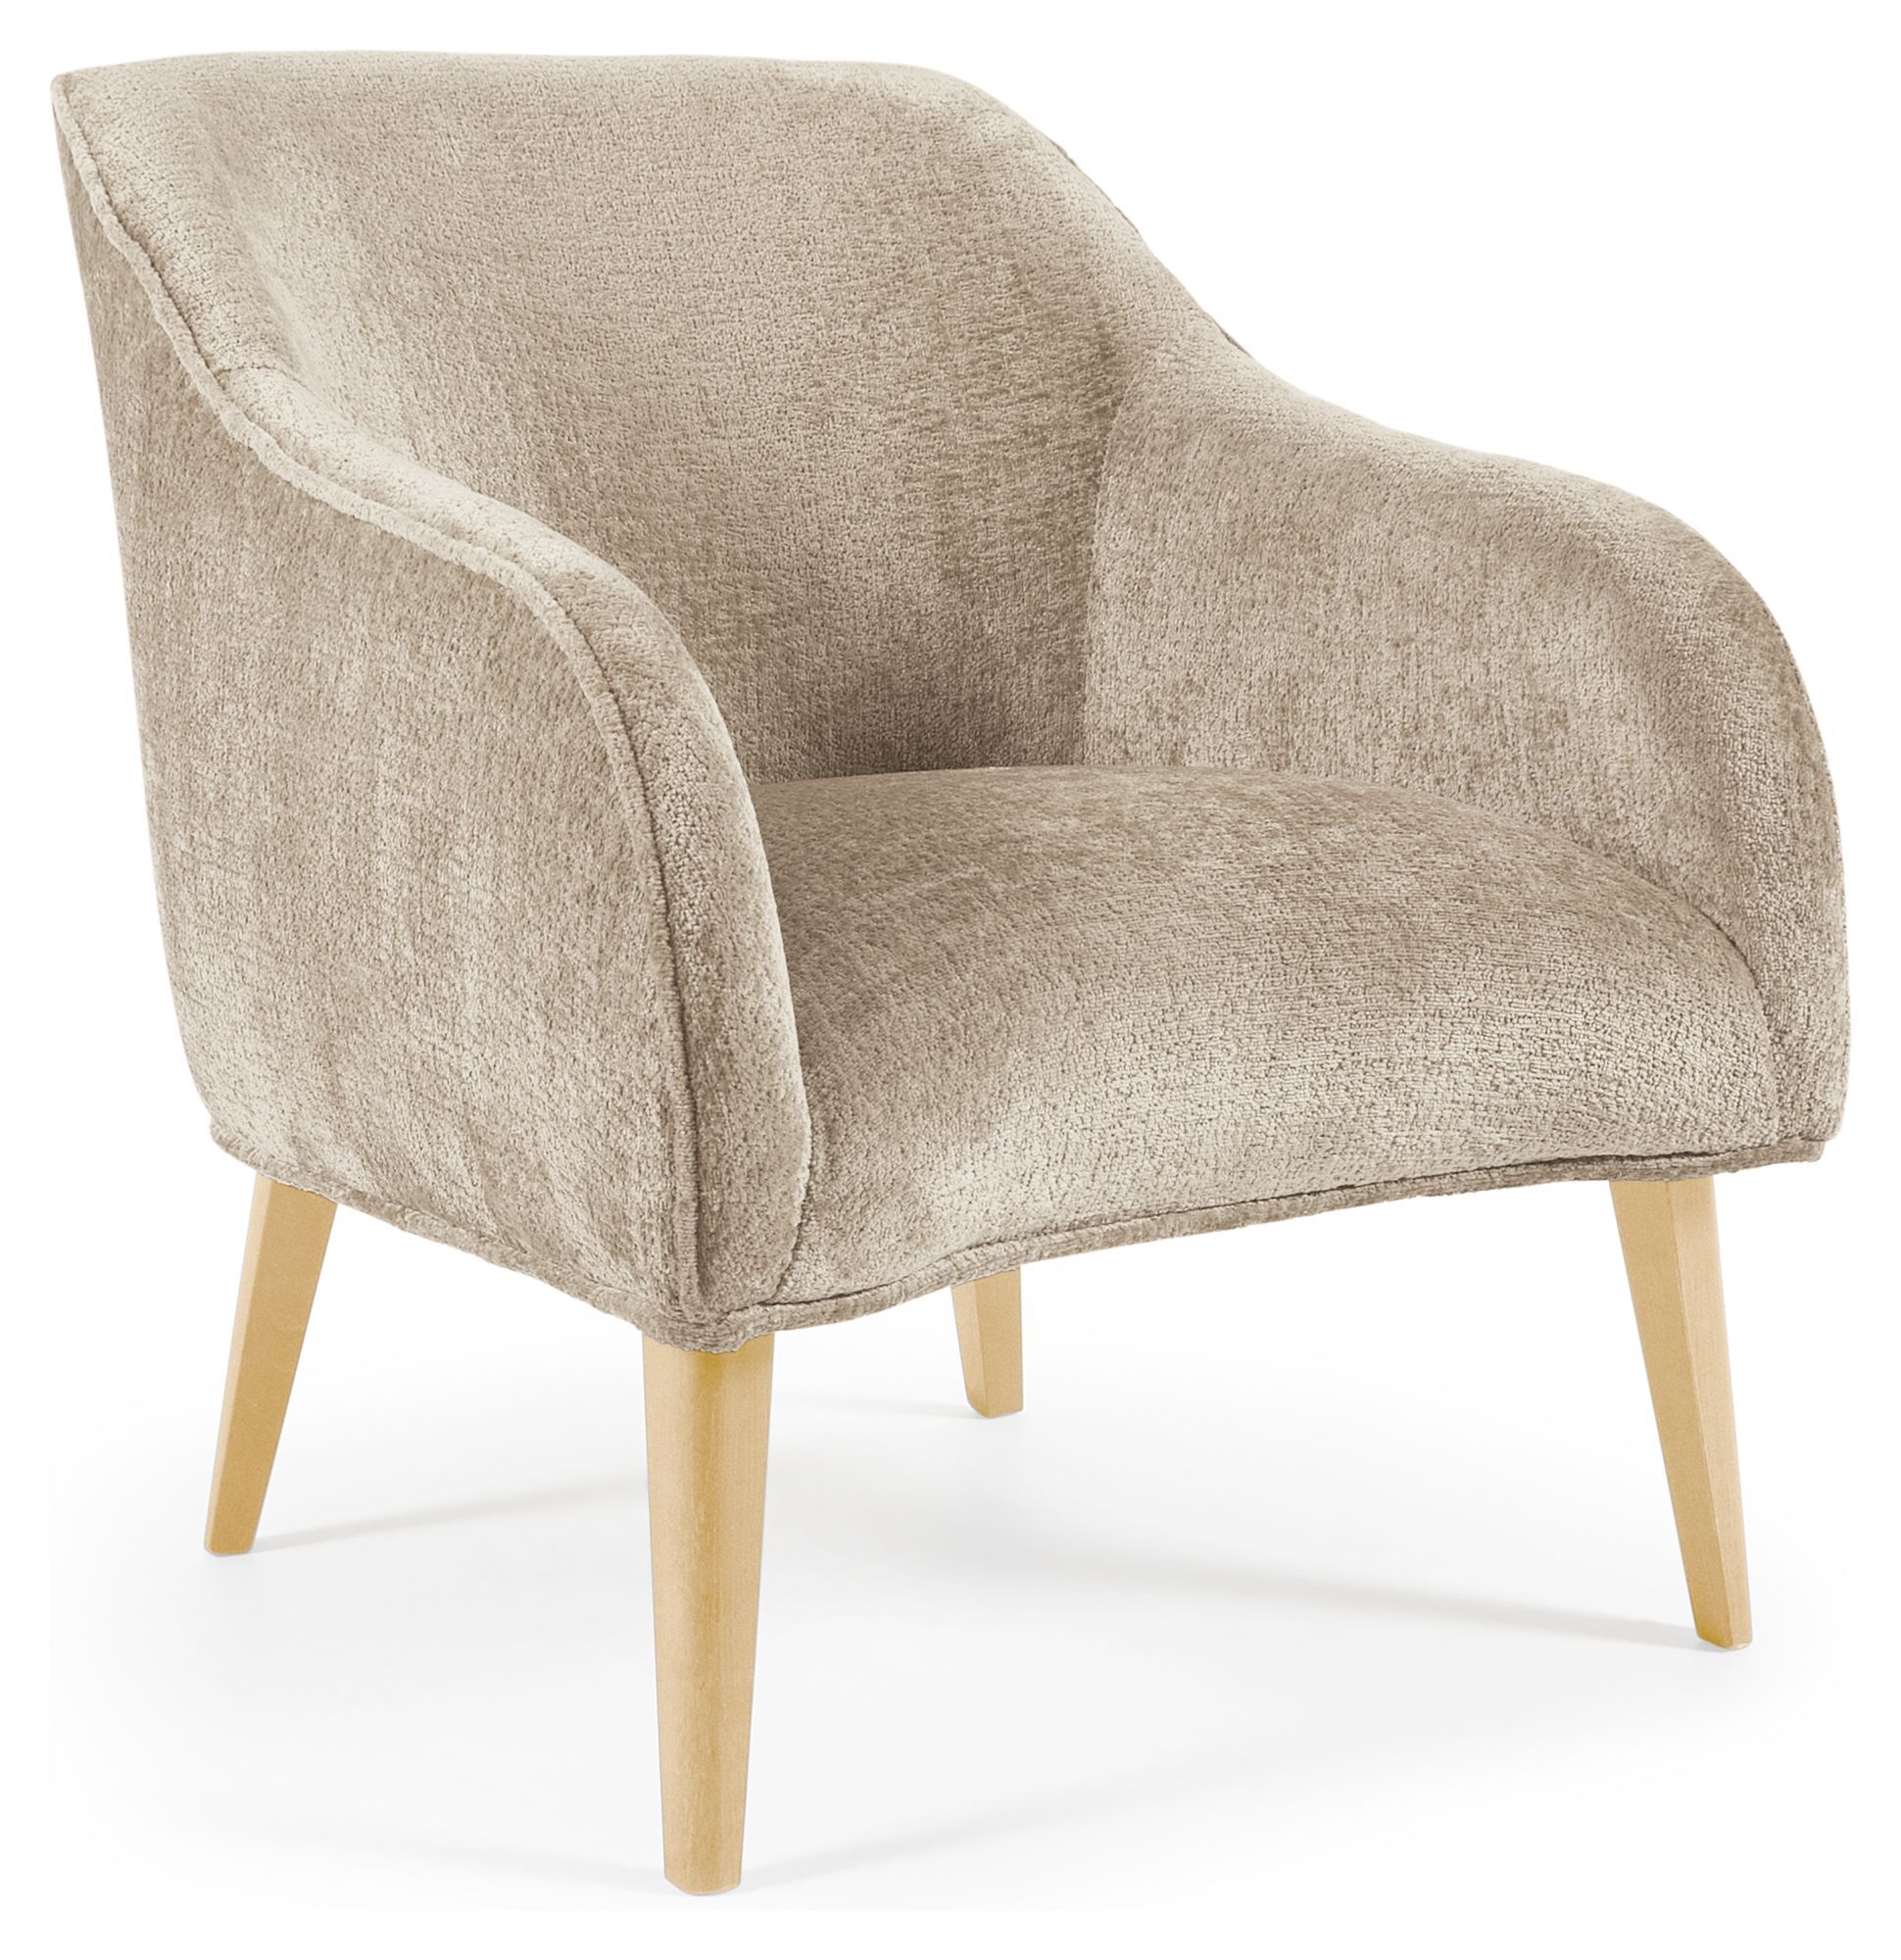 Kave Home Bobly Loungestol, Beige chenille/Trebein   Unoliving